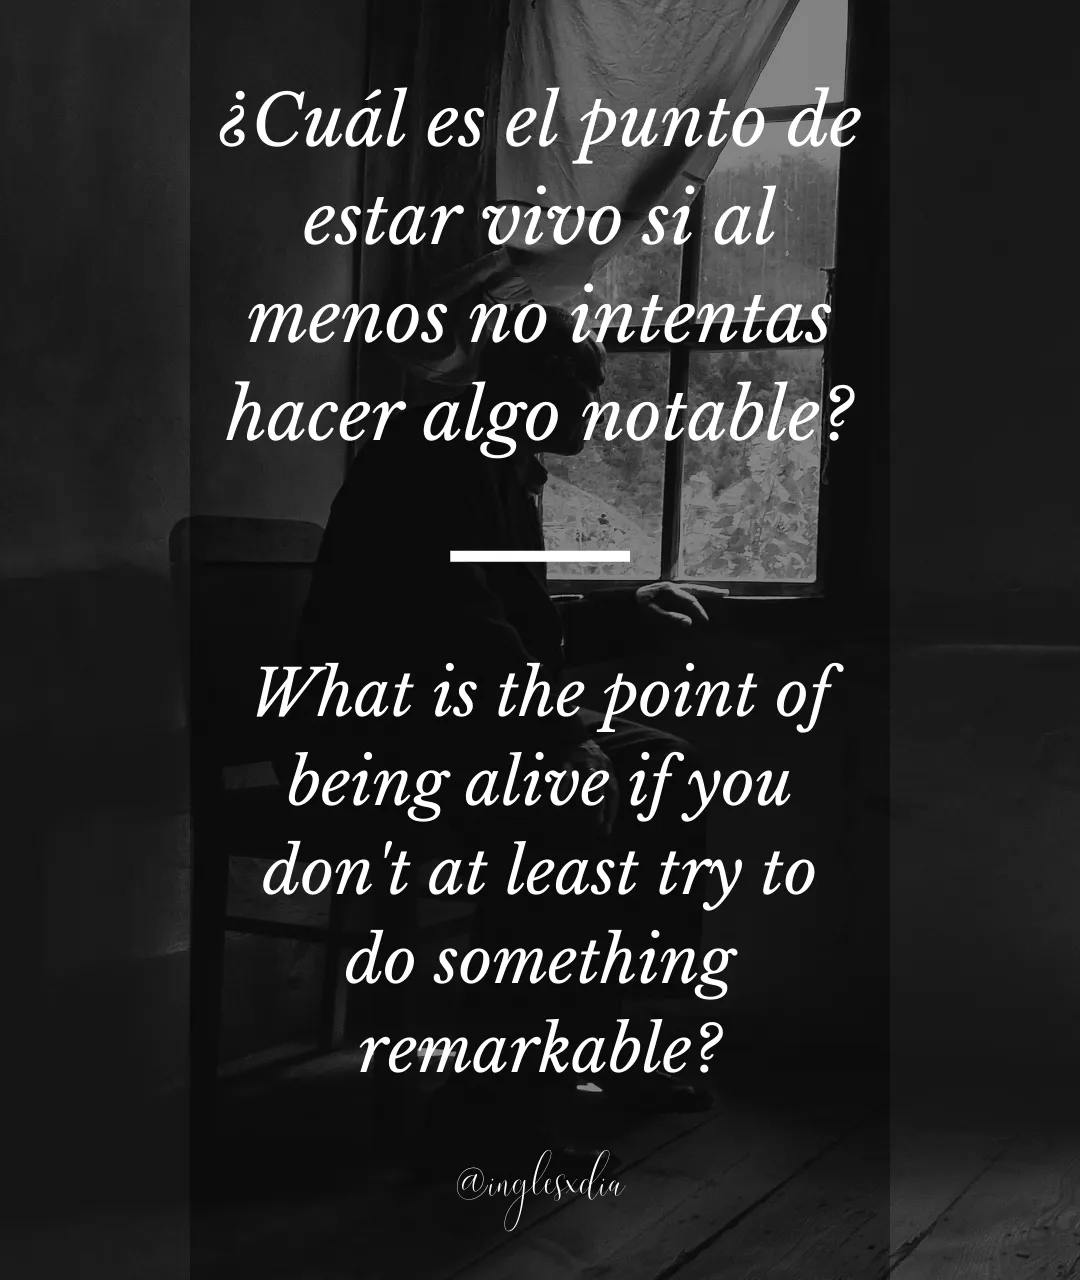 Frases motivadoras en inglés: What is the point of being alive if you don't at least try to do something remarkable?